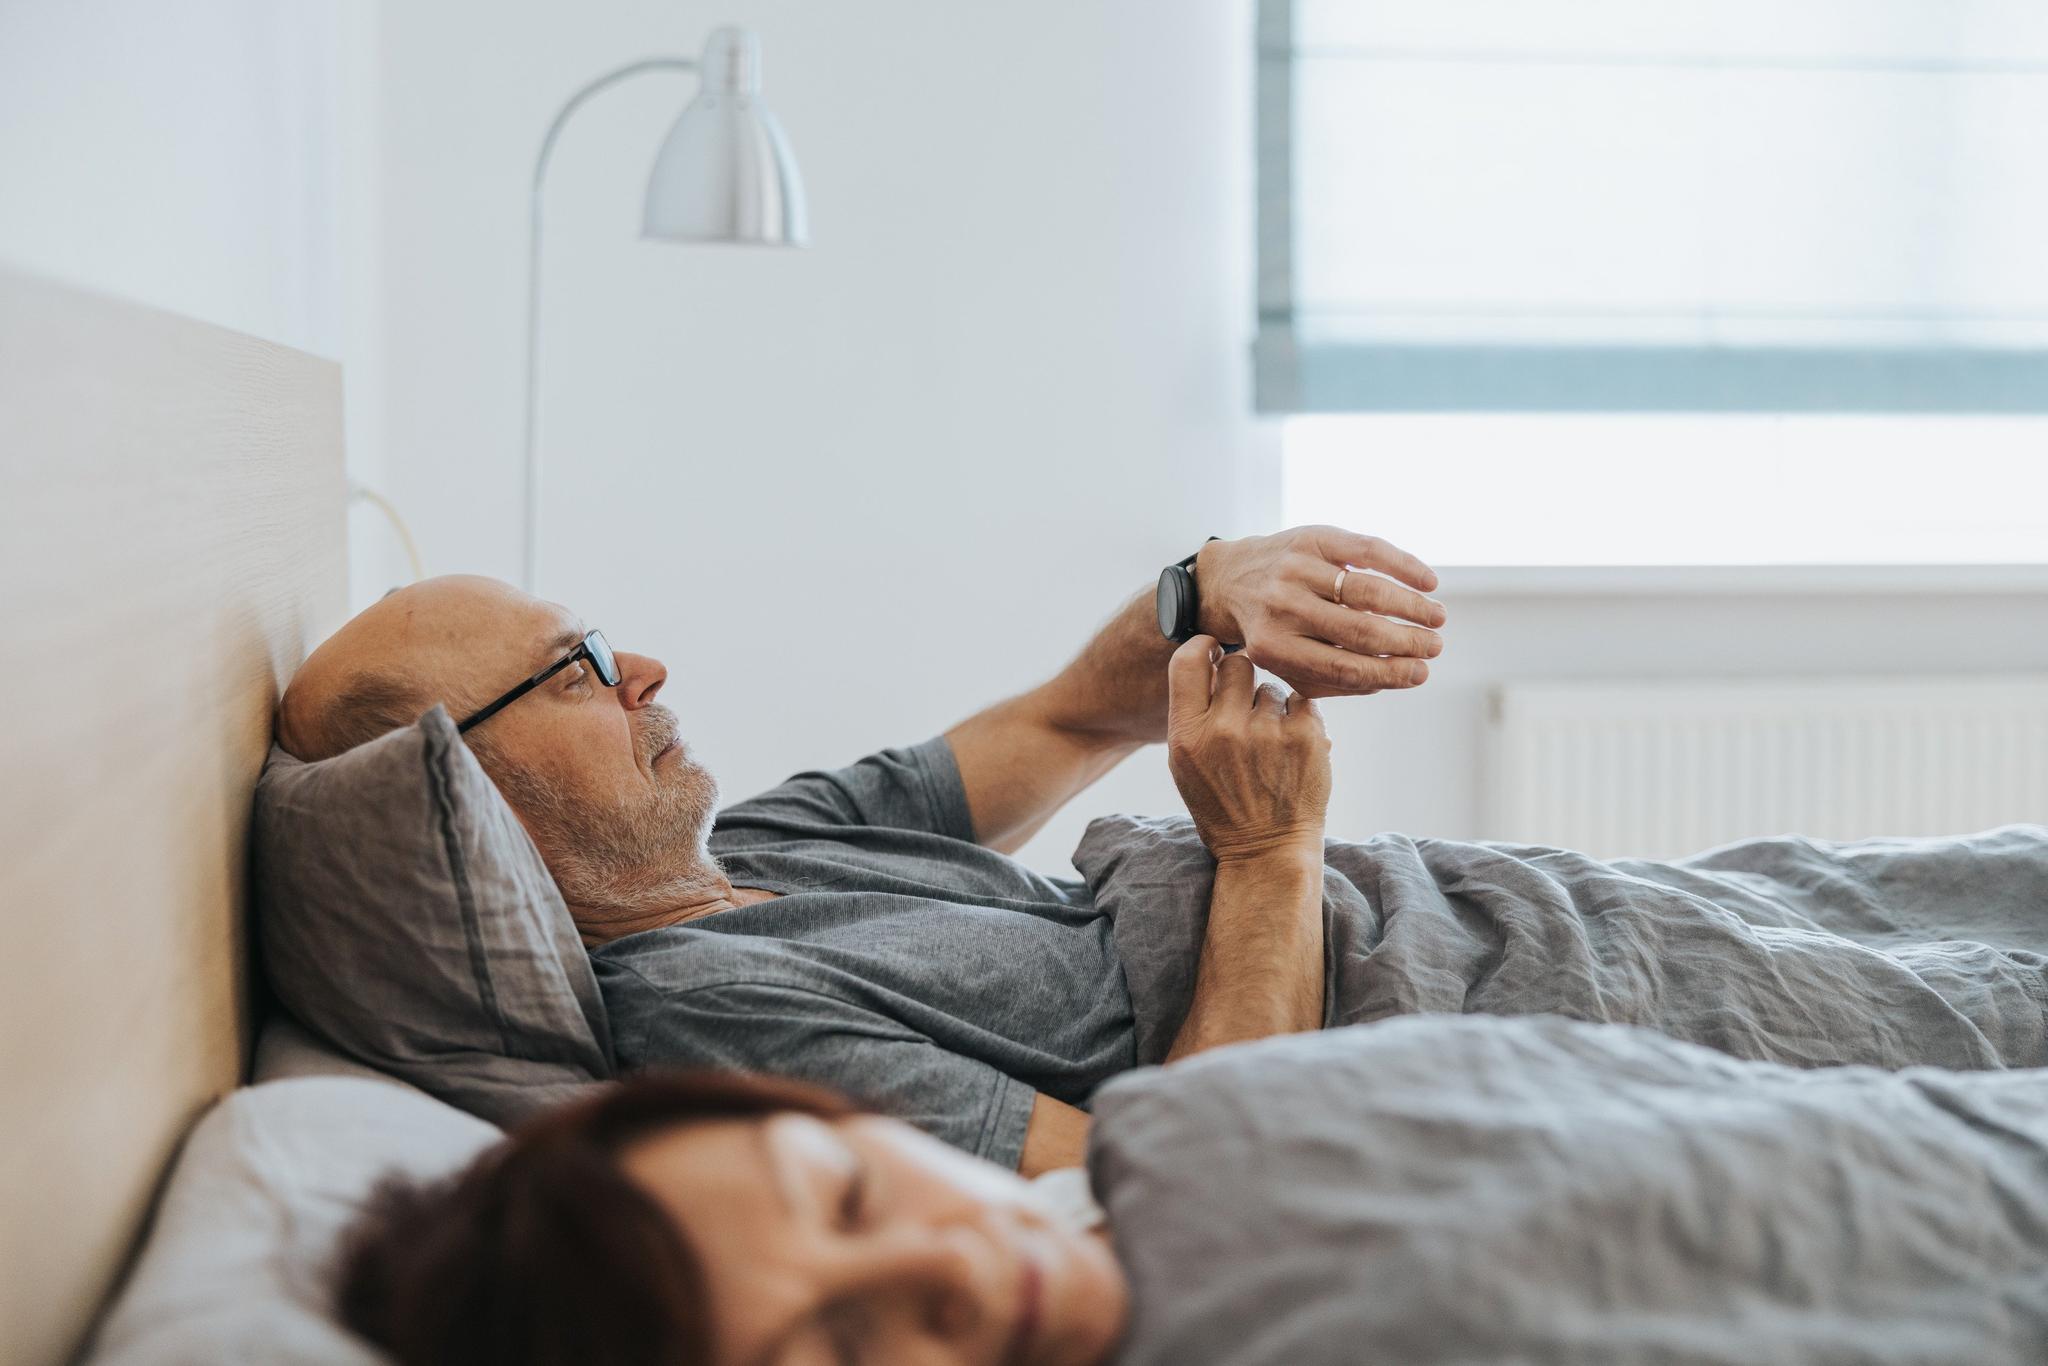 A man looks at a smartwatch in bed.